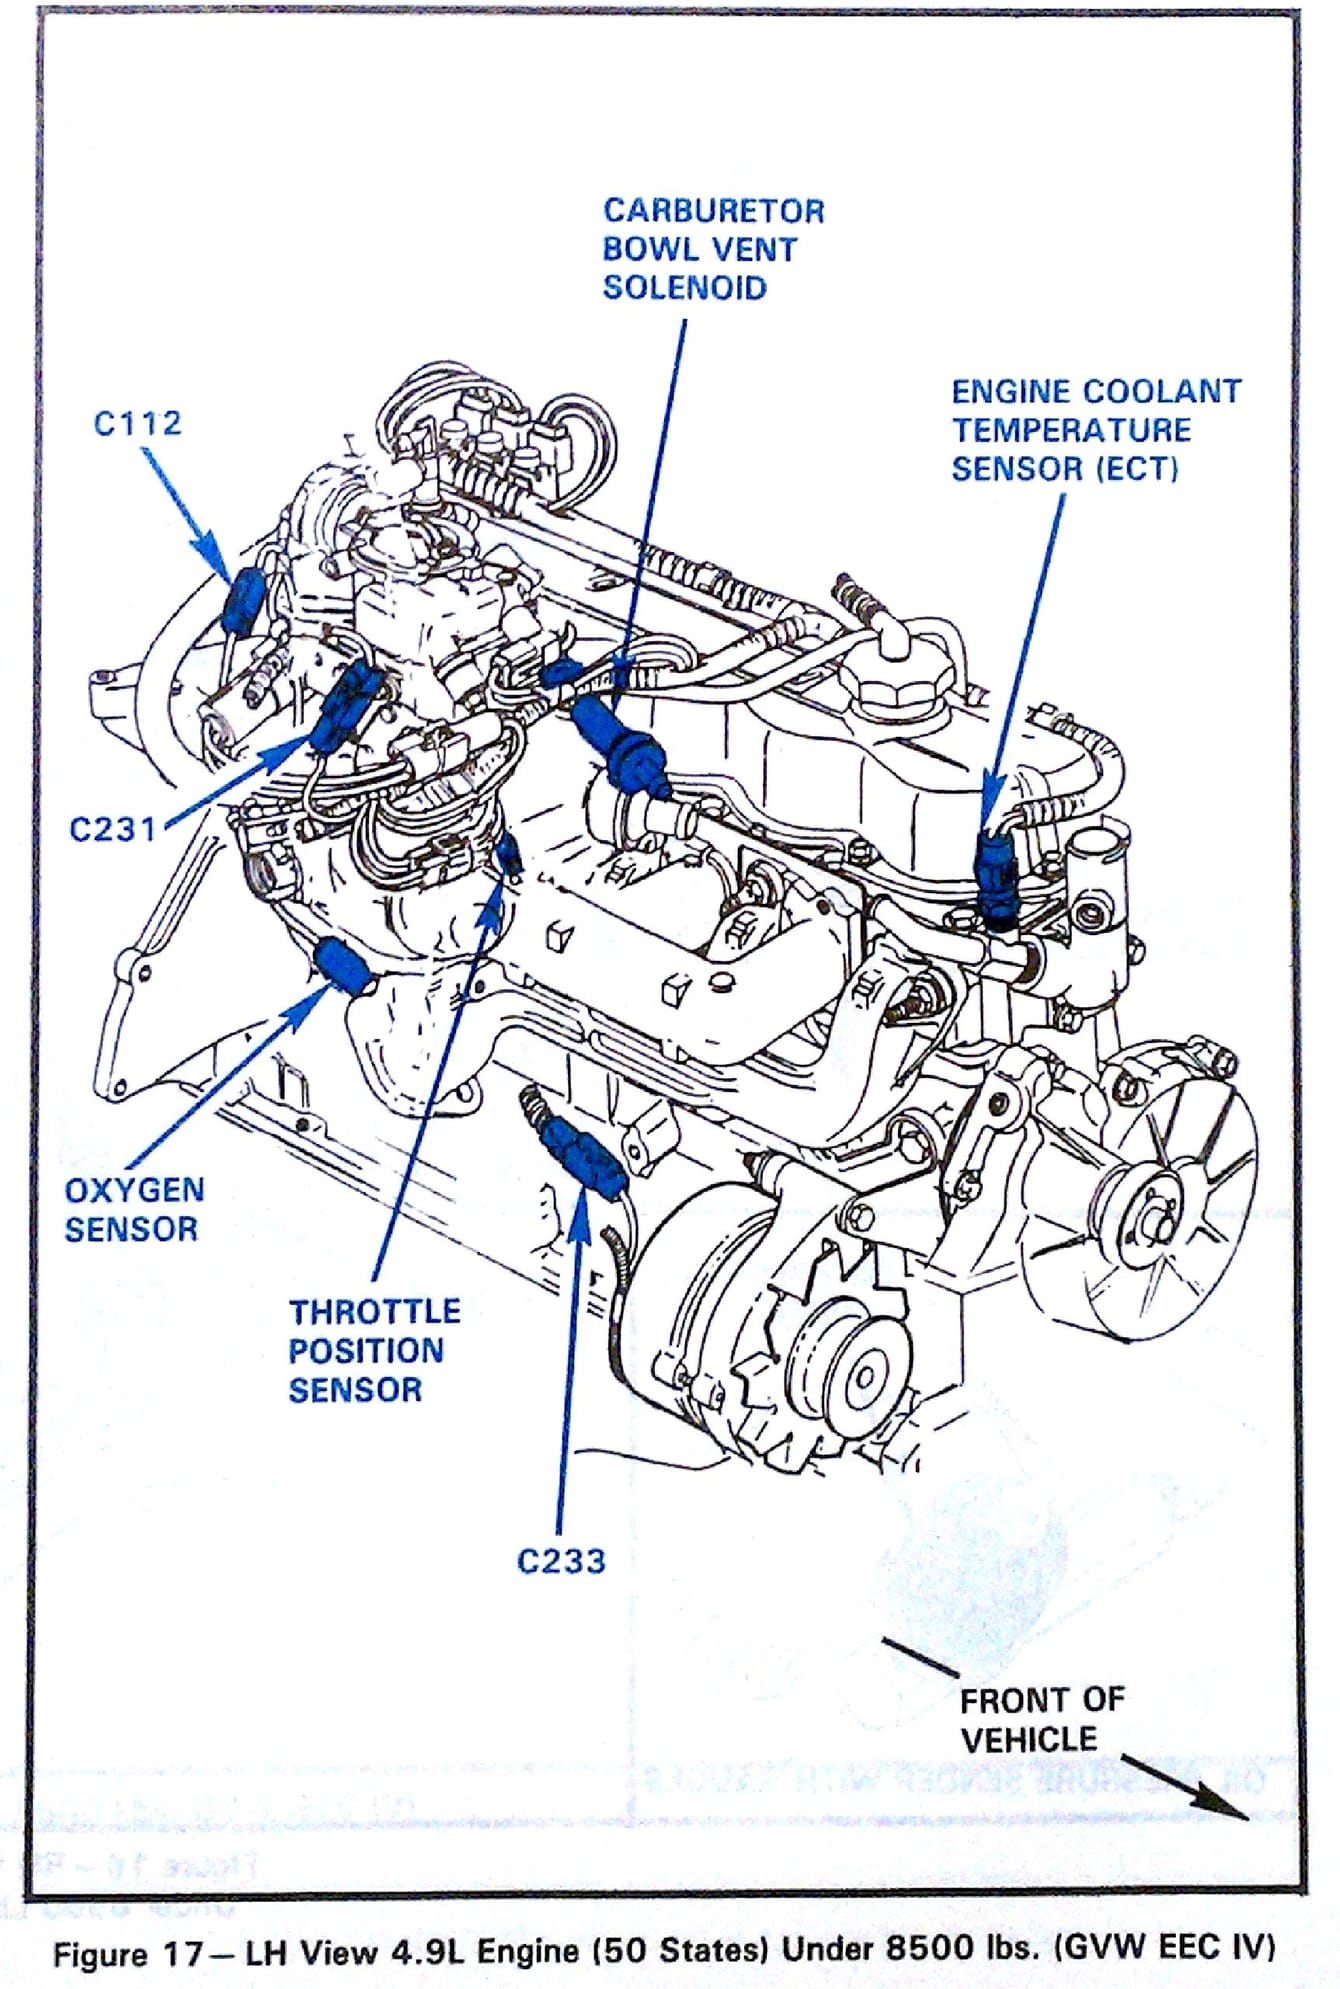 1985 ford f150 300 inline 6 smog help - Ford Truck Enthusiasts Forums